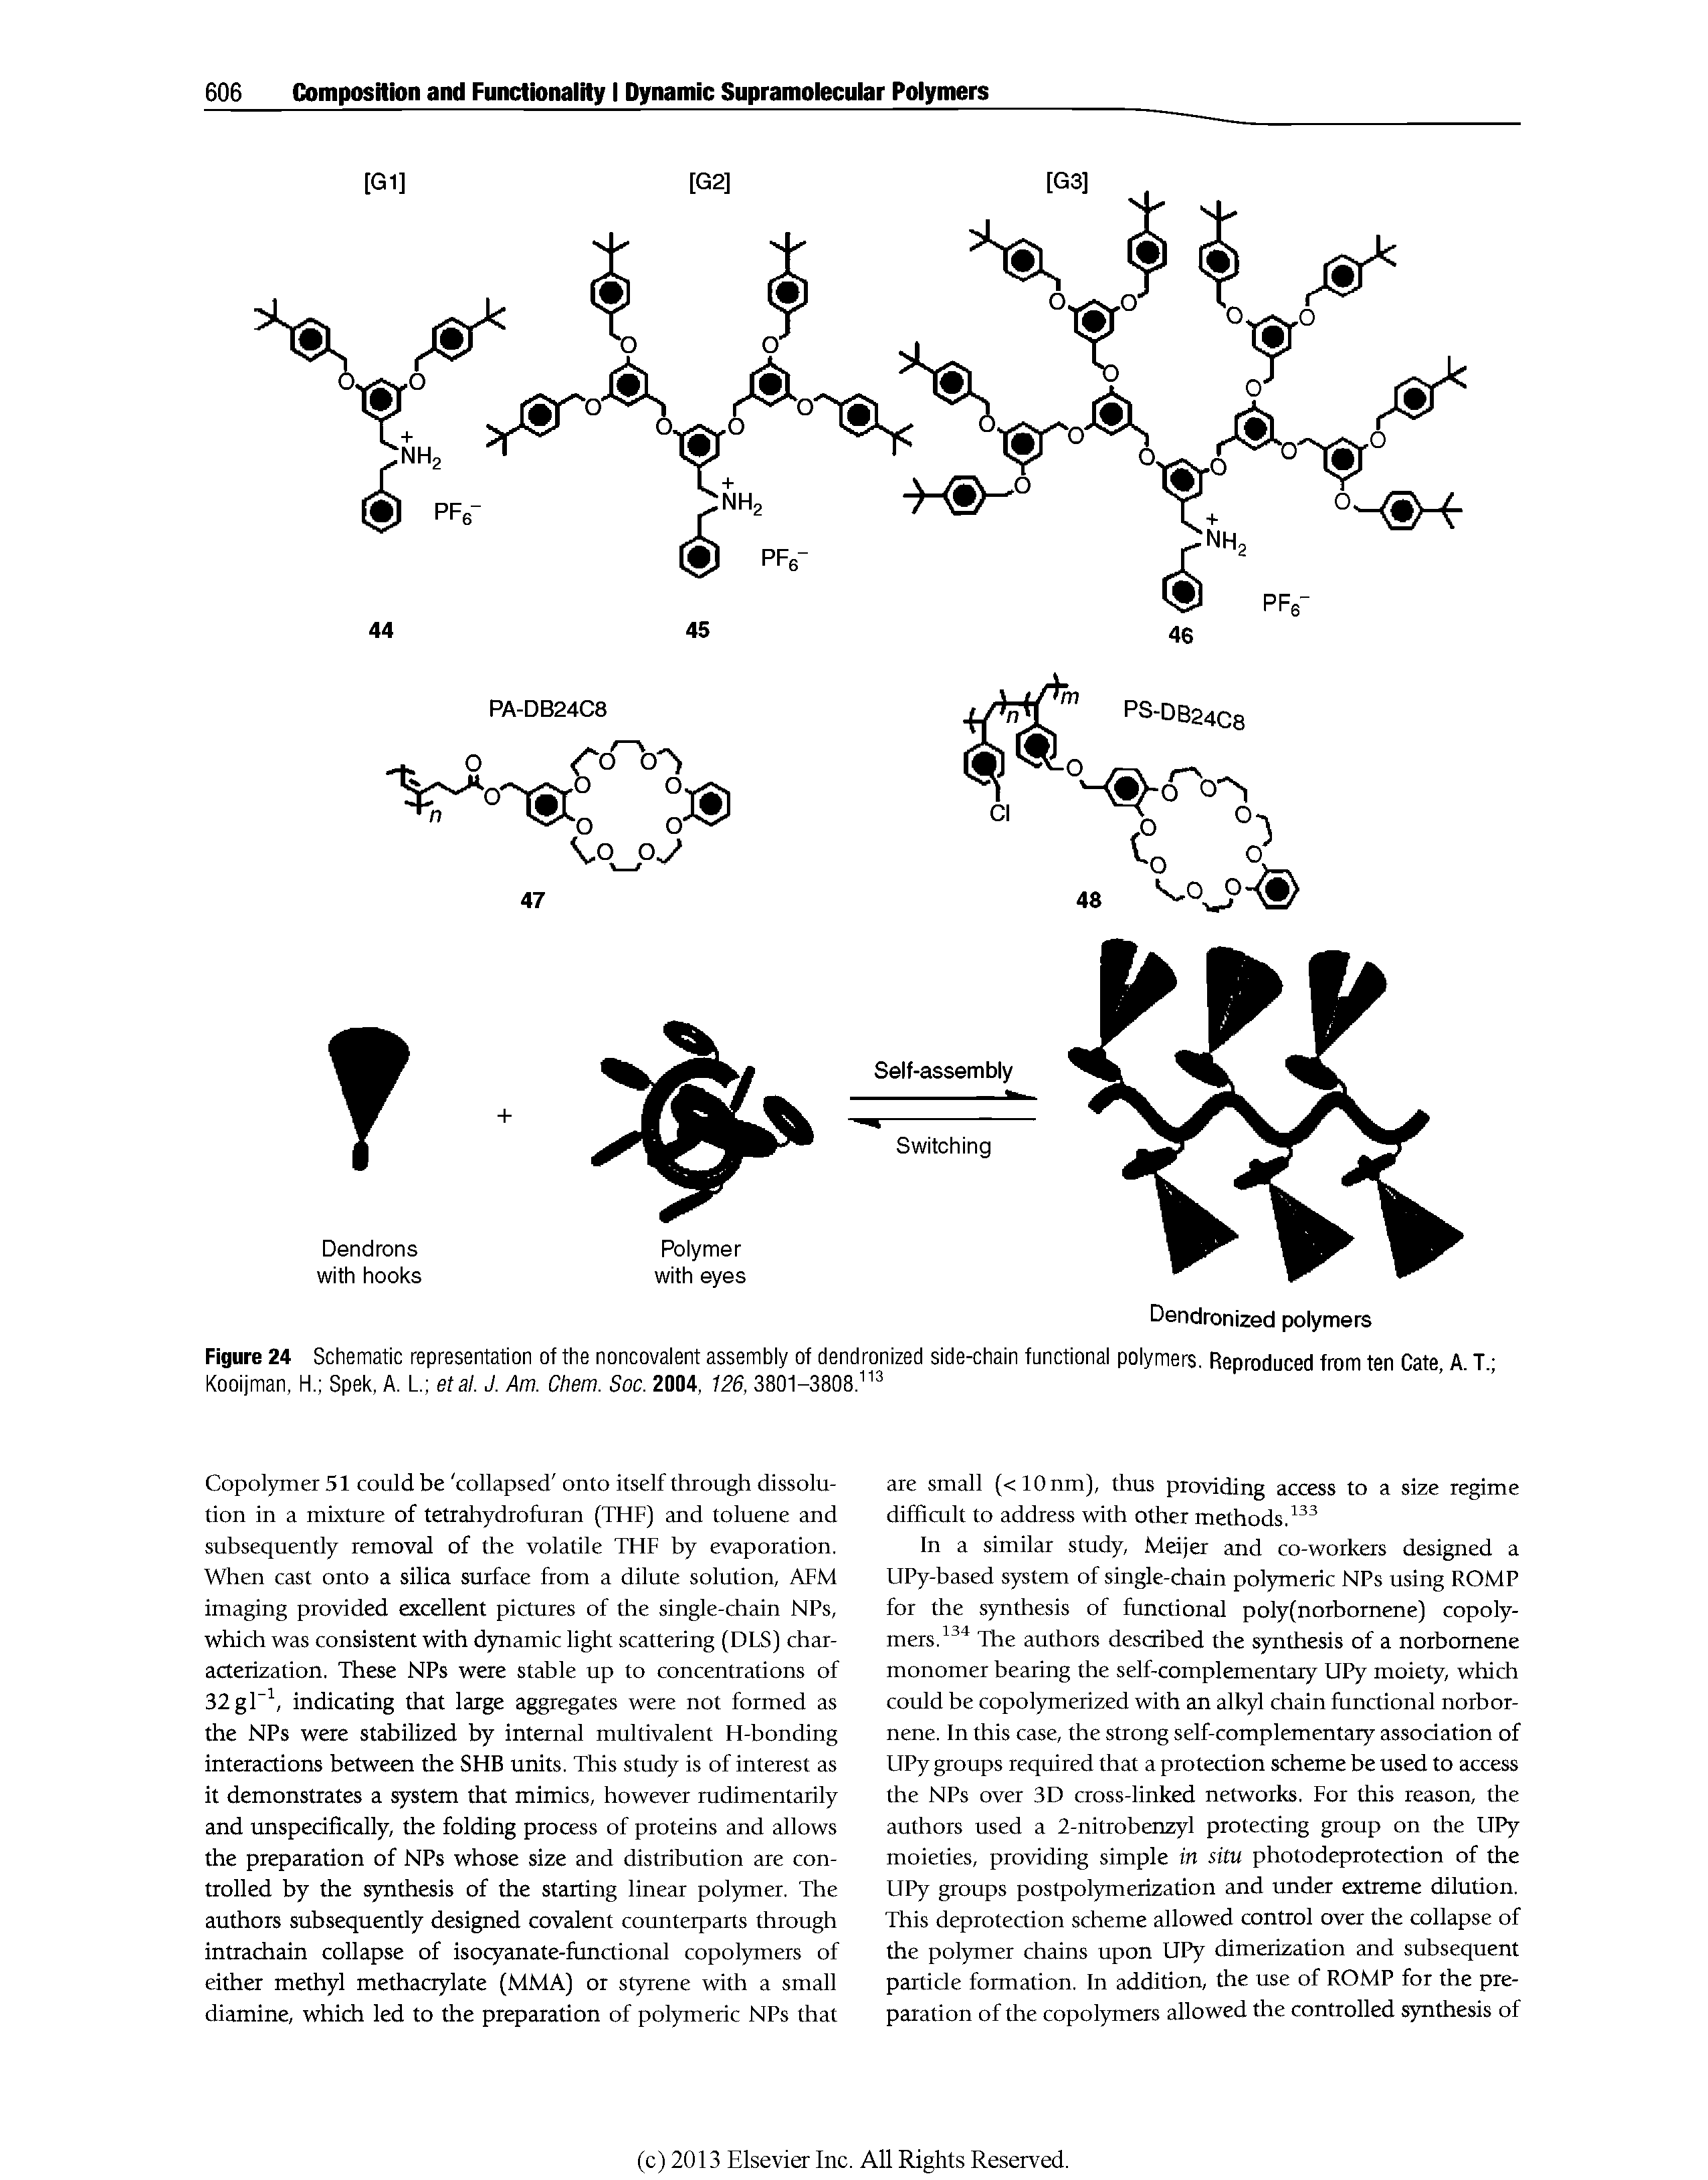 Figure 24 Schematic representation of the noncovalent assembly of dendronized side-chain functional polymers. Reproduced from ten Cate, A. T. Kooijman, H. Spek, A. L. etal. J. Am. Chem. Soc. 2004, 126,3801-3808. ...